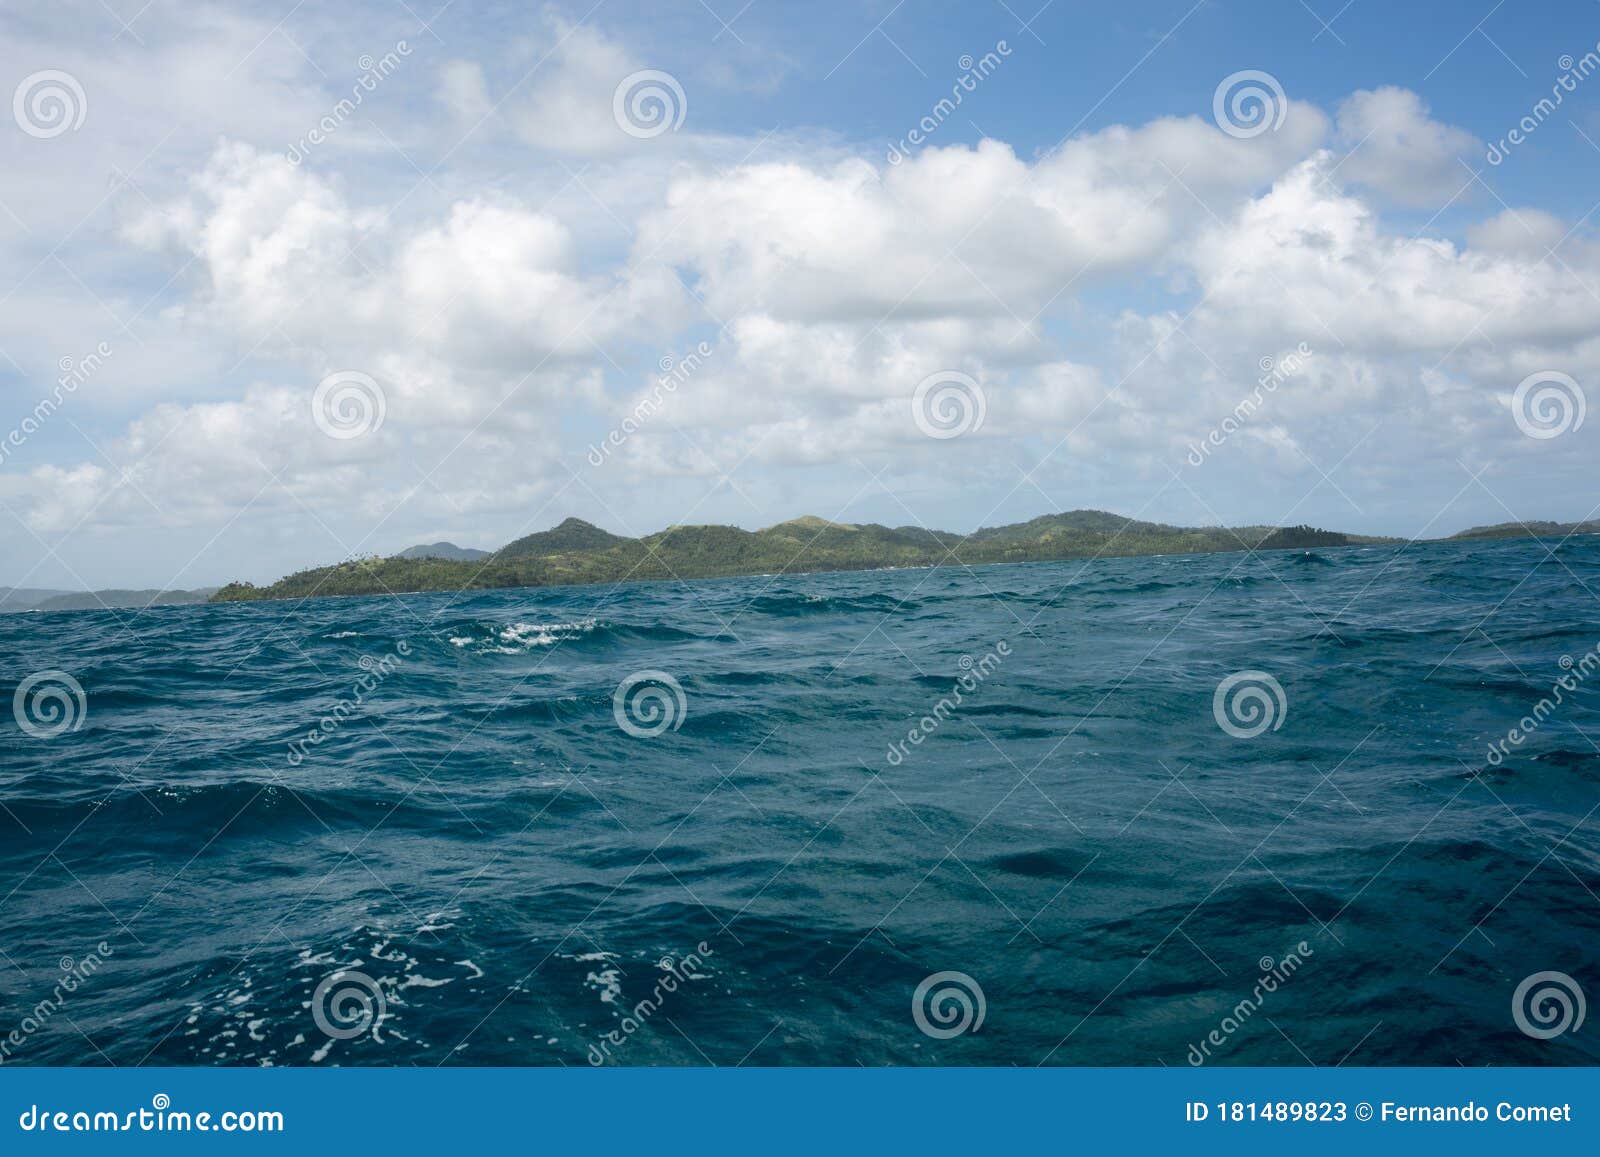 The Pacific Ocean In The Philippines Stock Image Image Of Summer